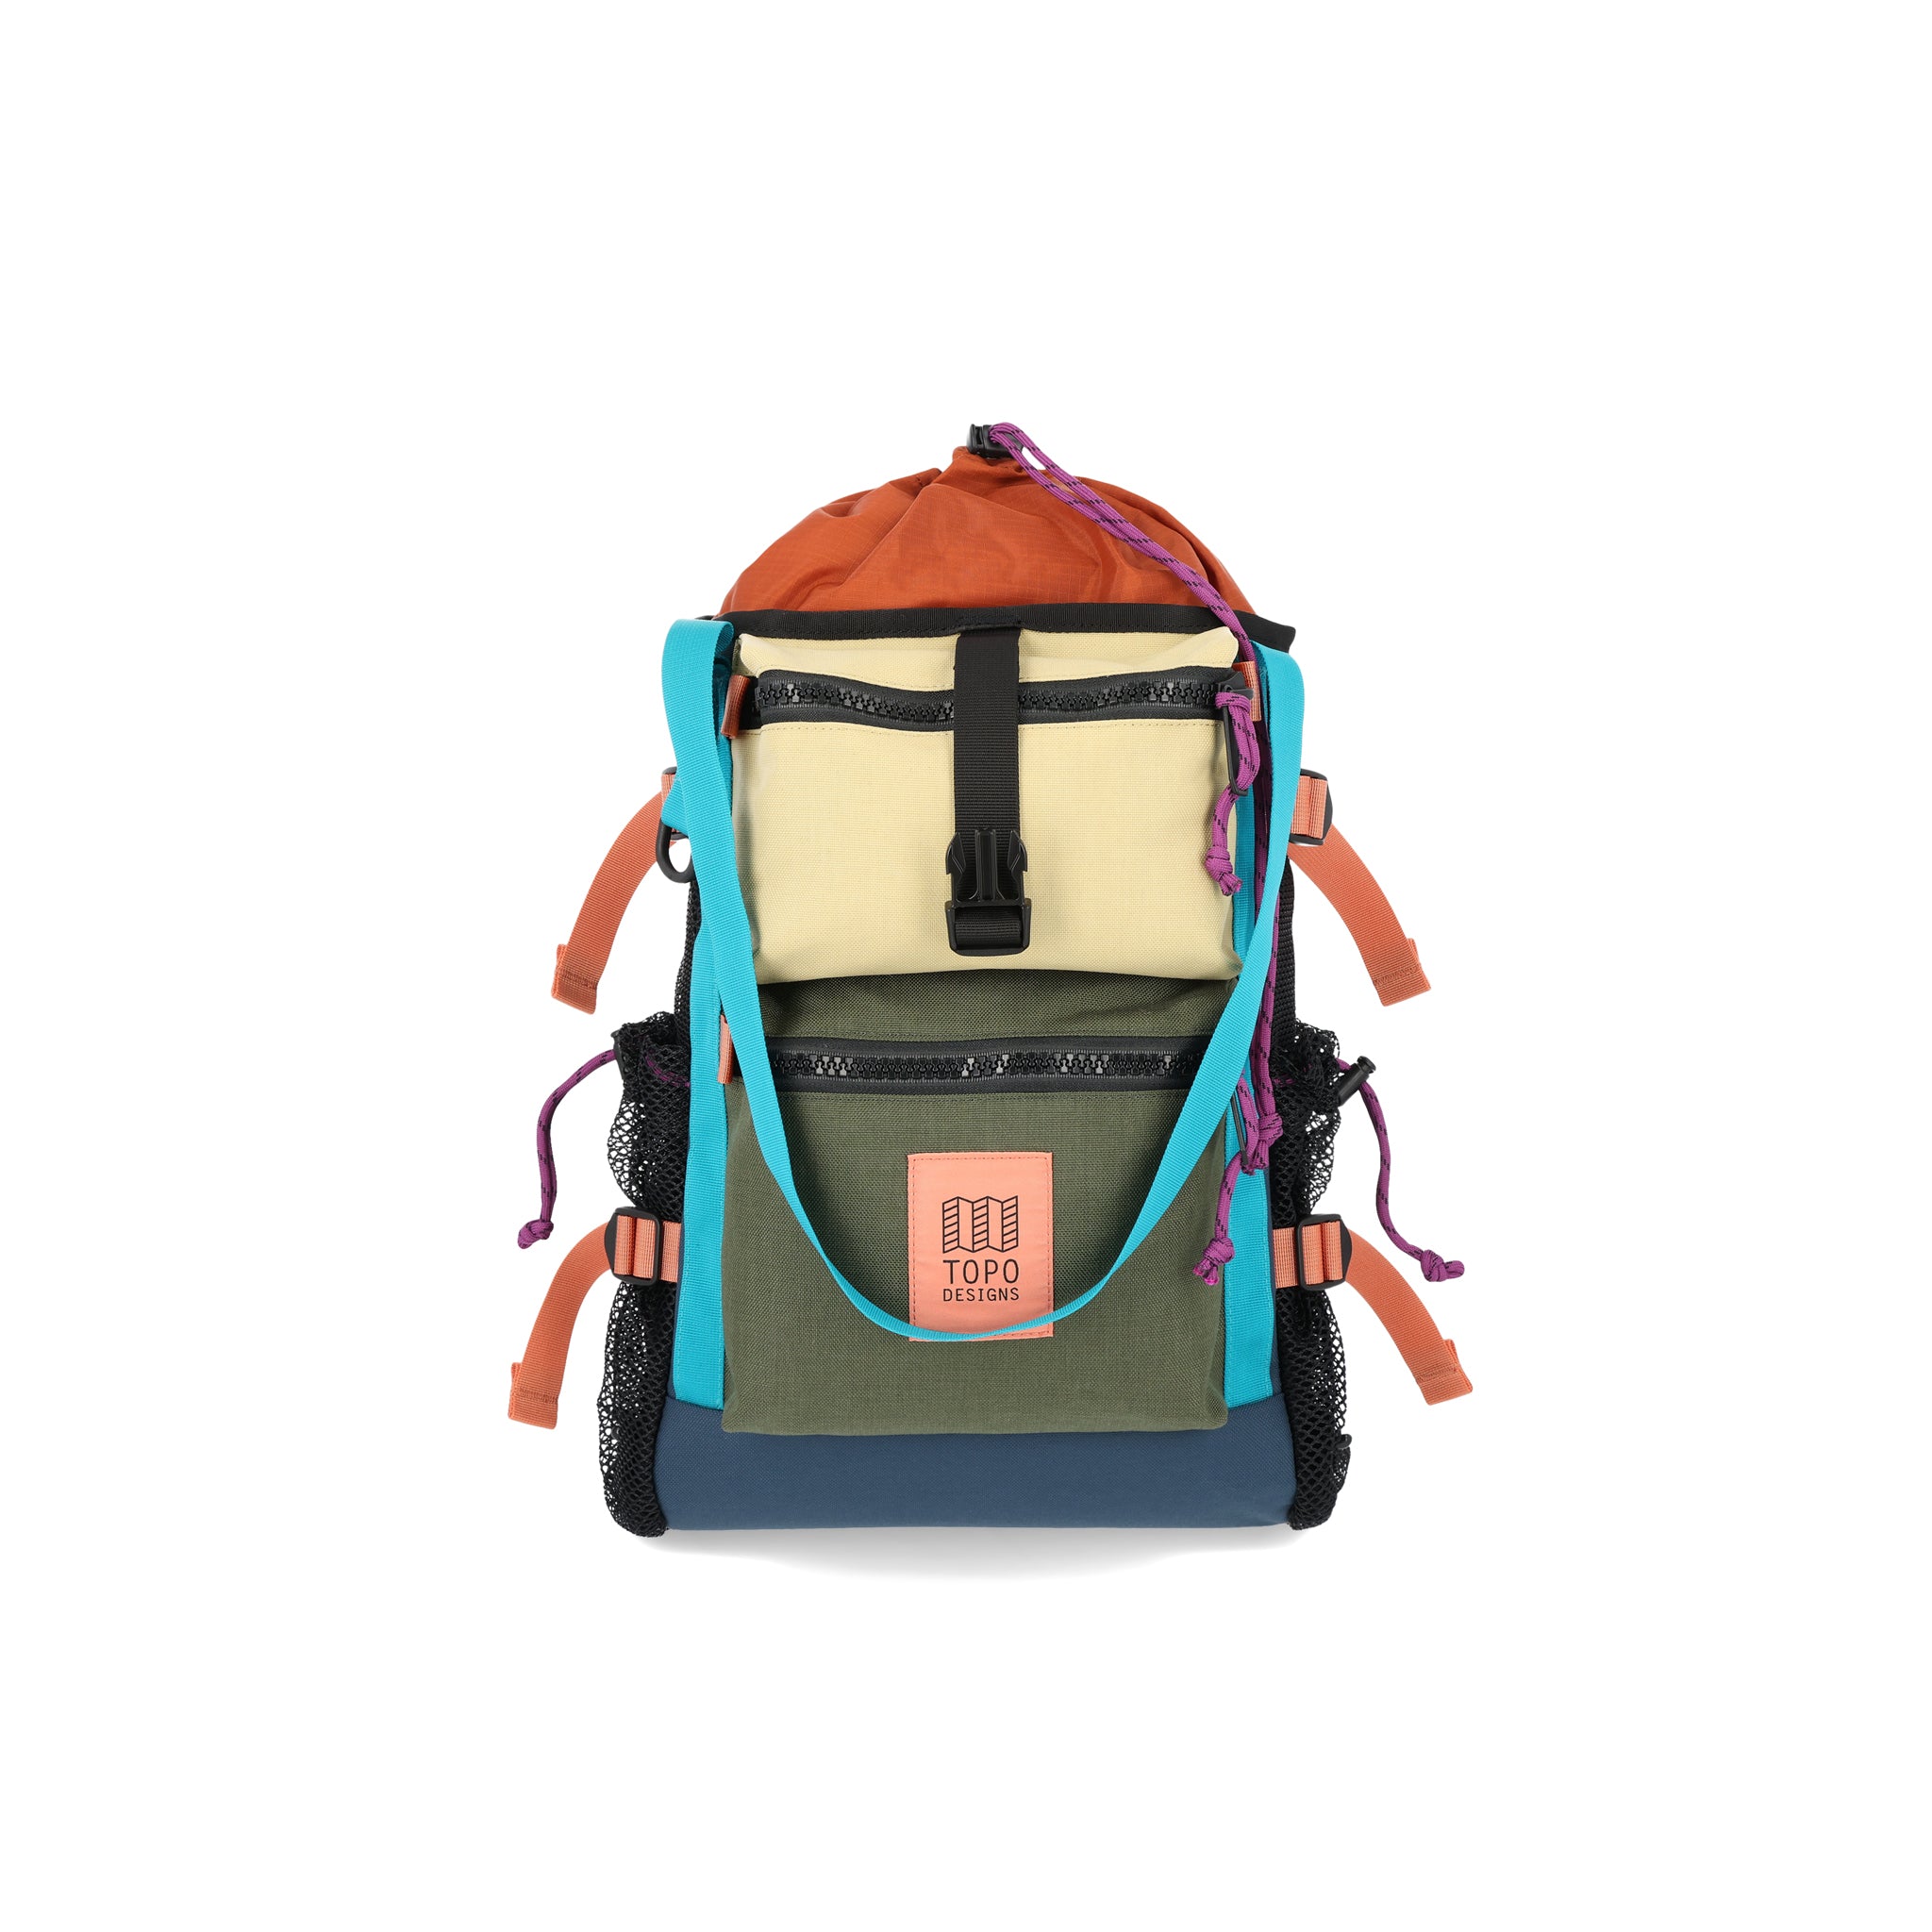 Backpacks, Shop Top Brands at Discount Prices